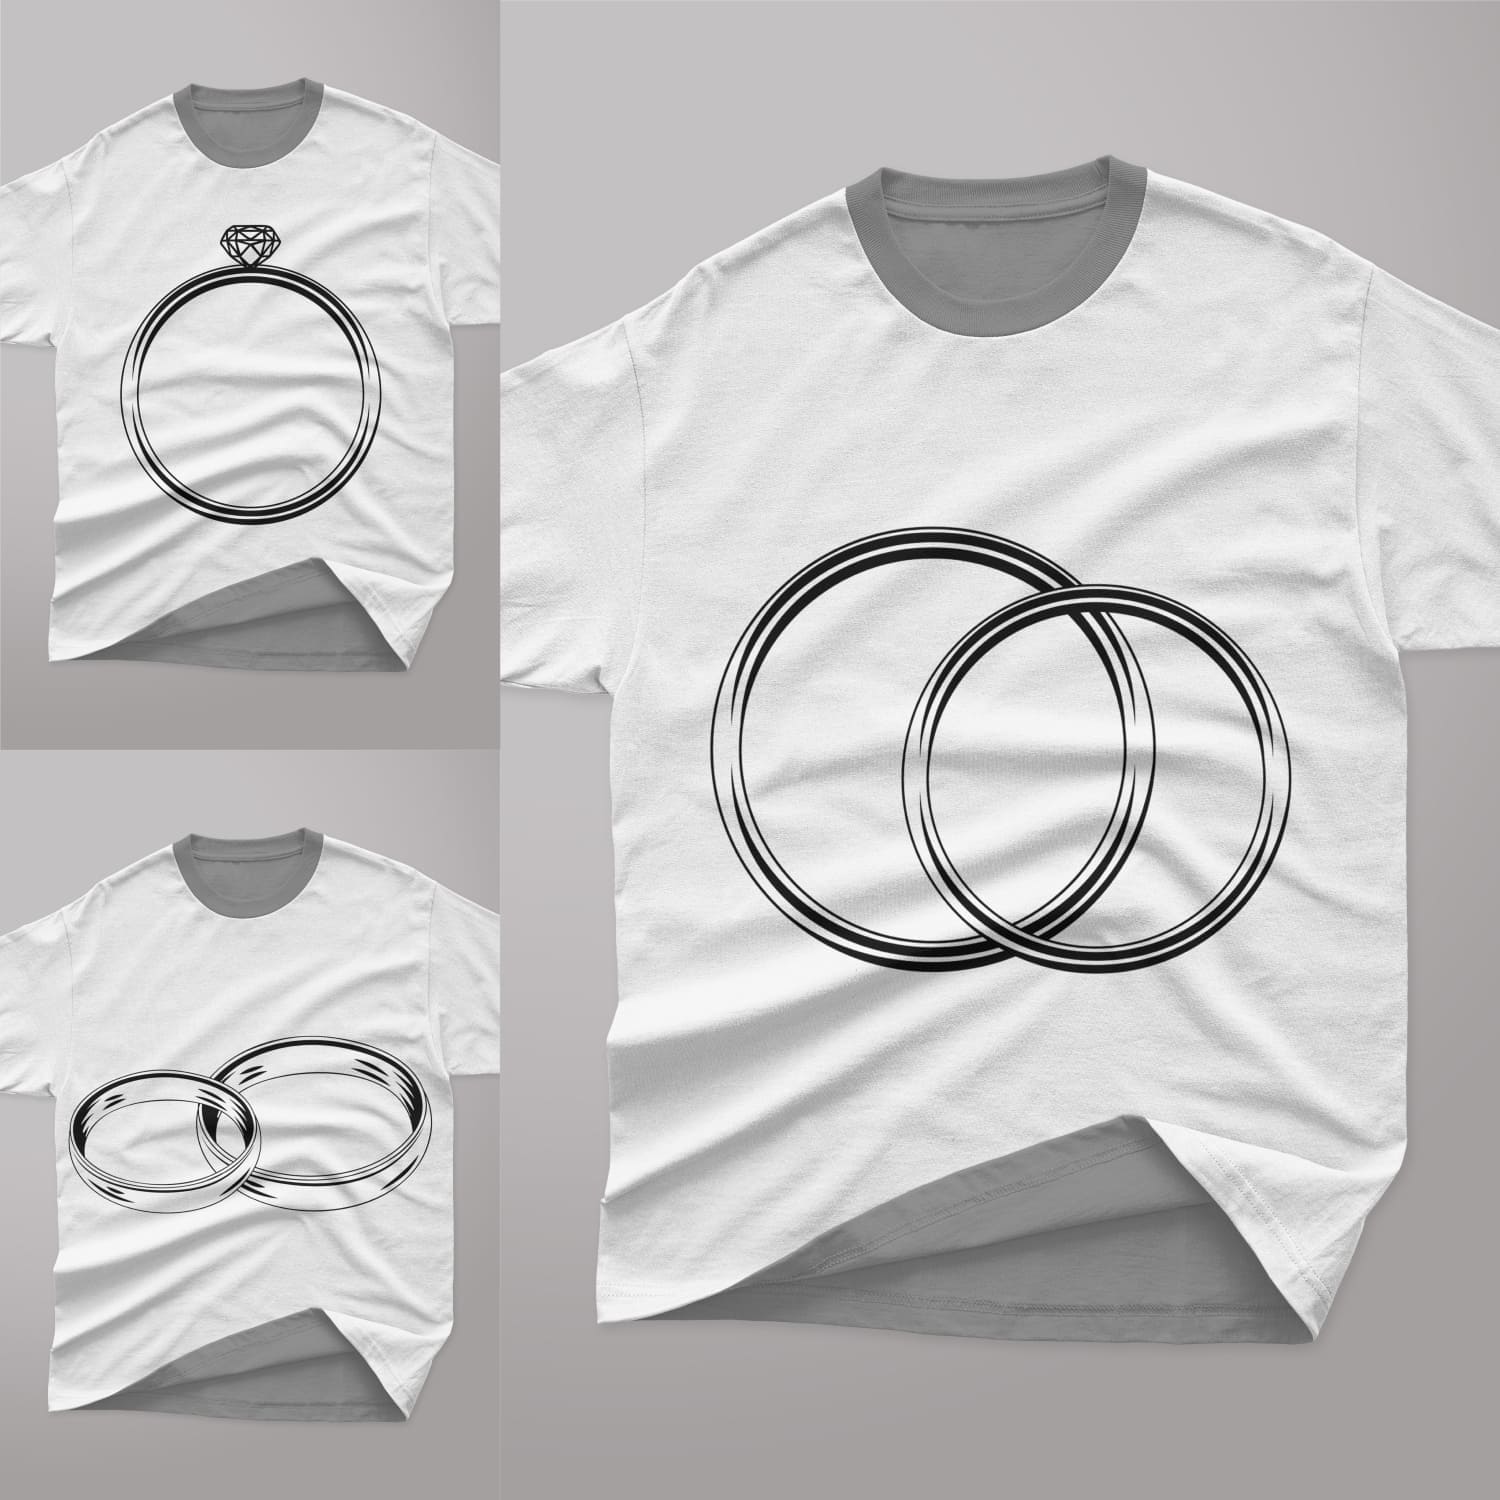 Three options of wedding rings that are drawn on T-shirts.